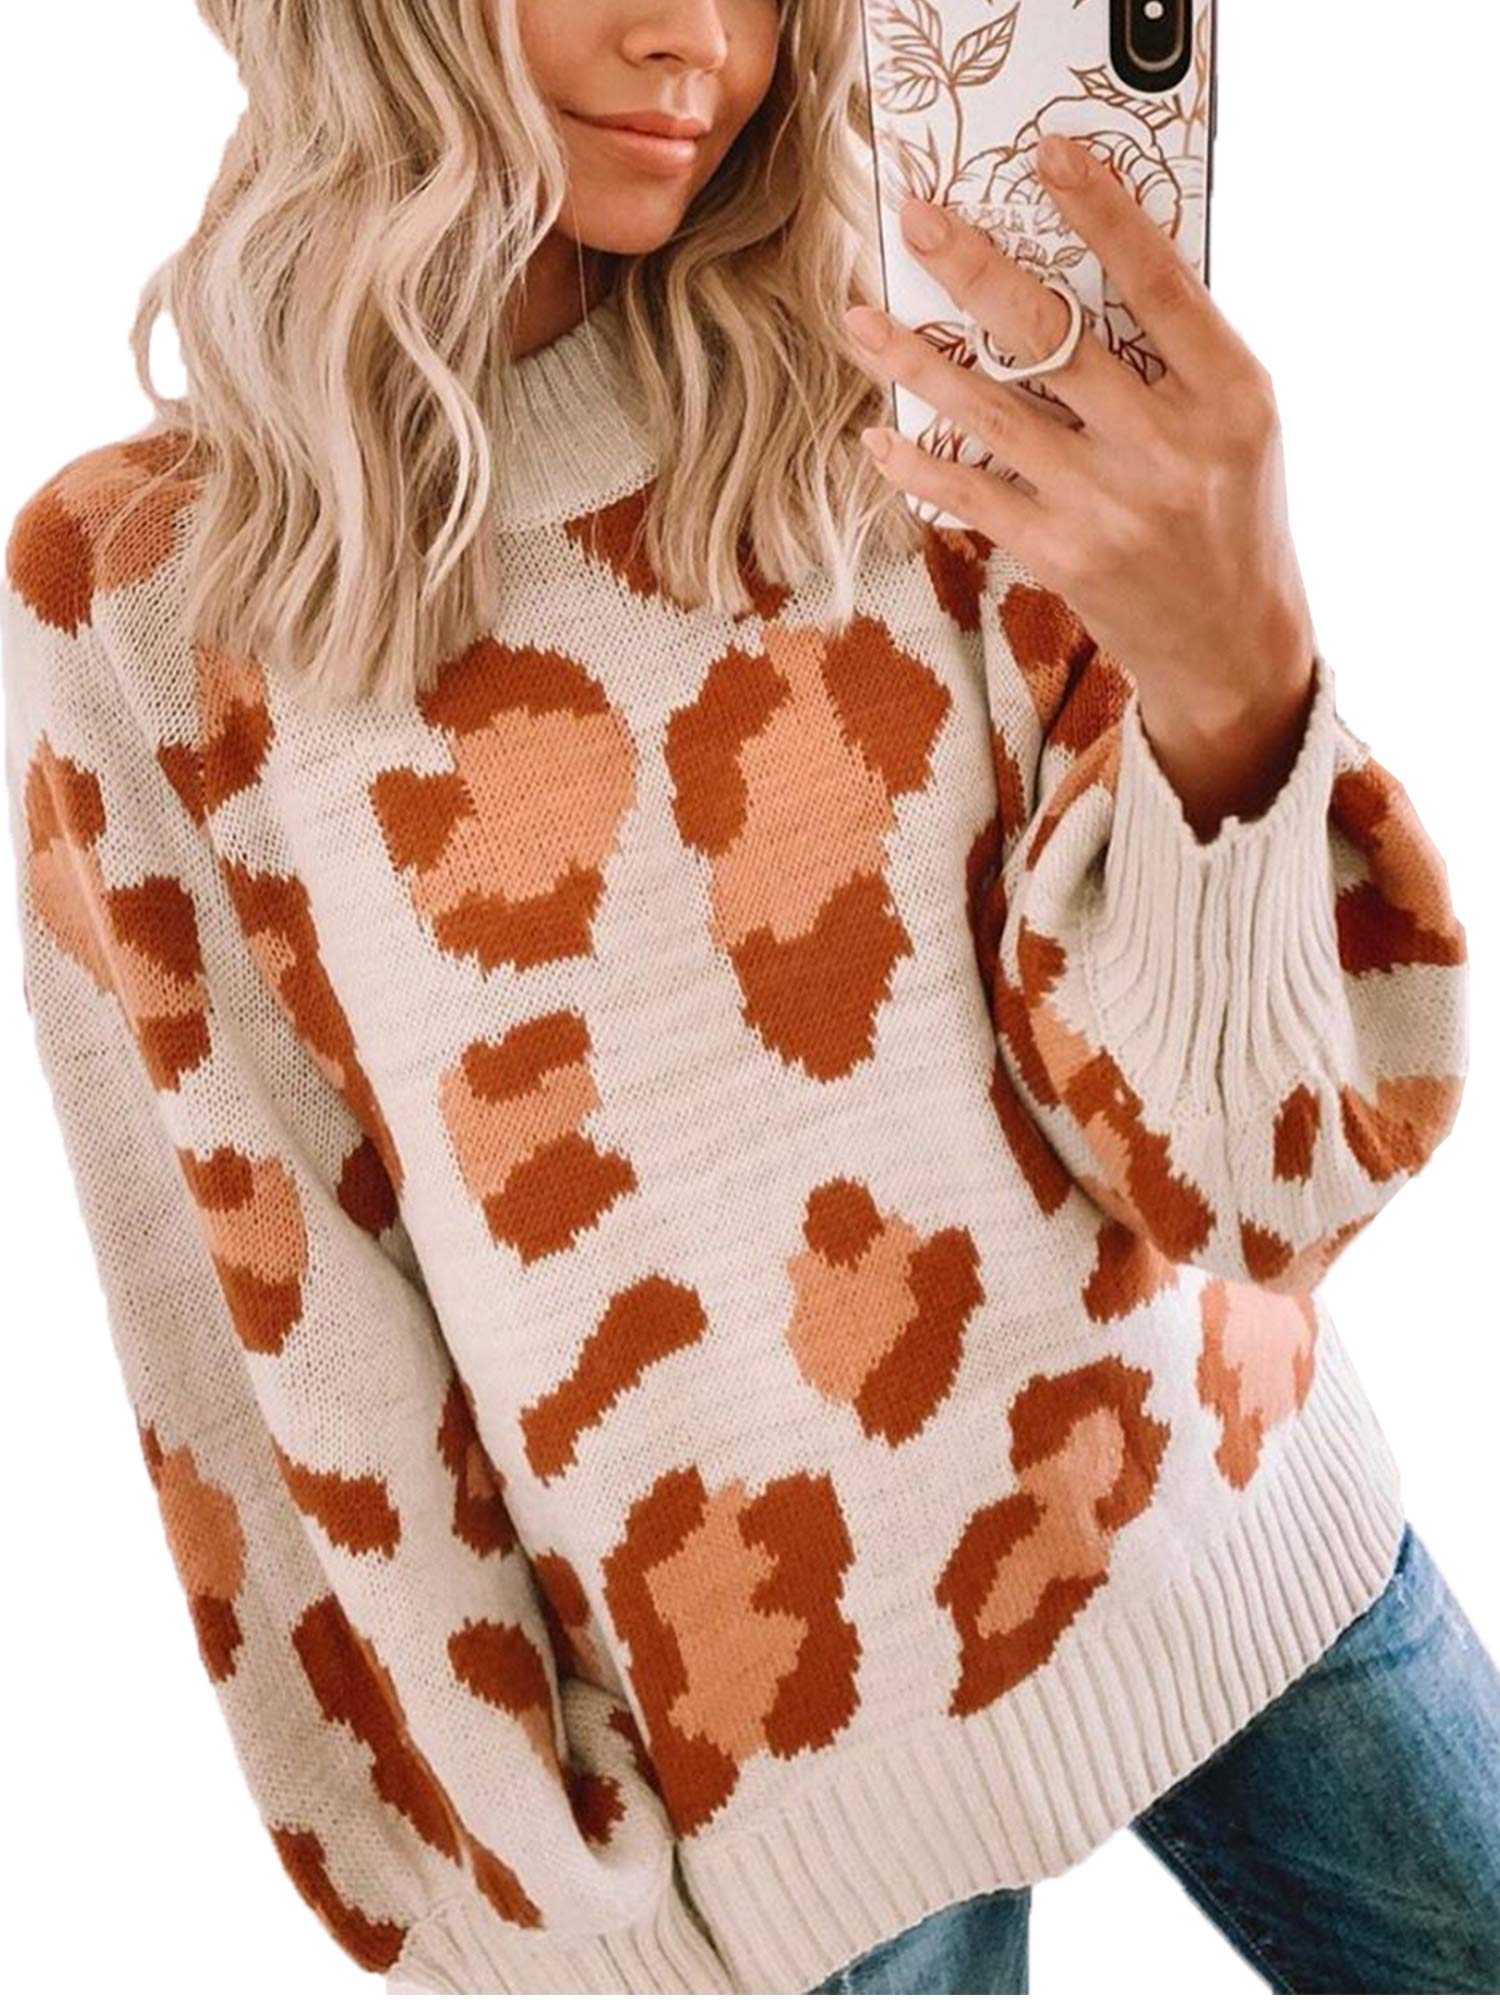 Book Cover Angashion Women's Sweaters Casual Oversized Leopard Printed Crew Neck Long Sleeve Knitted Pullover Tops for Winter Small Beige